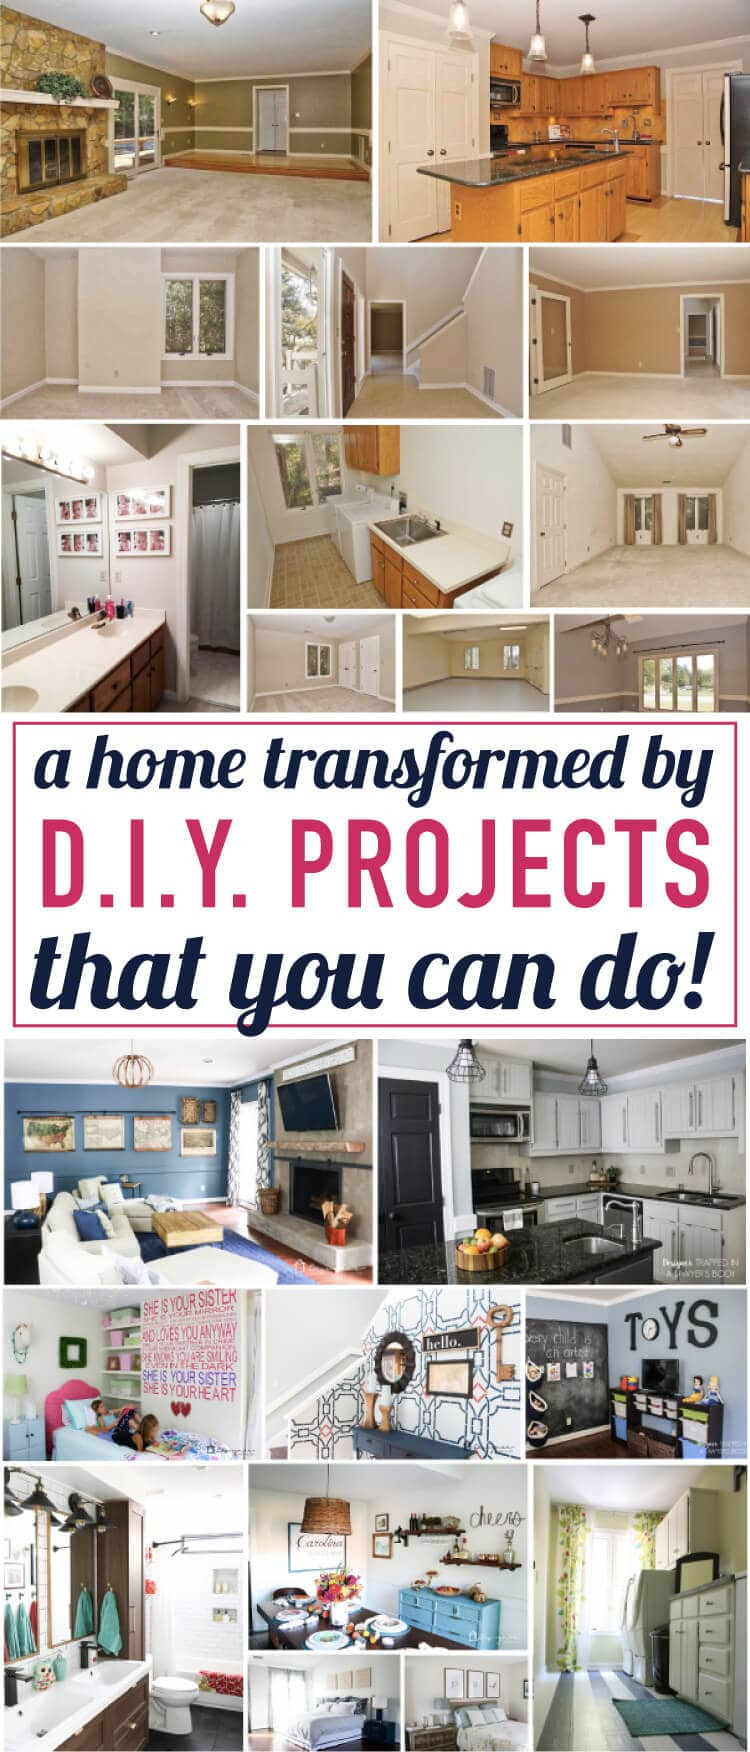 Pinterest DIY Crafts Home Decor
 Tour My Home full of DIY Home Decor Projects